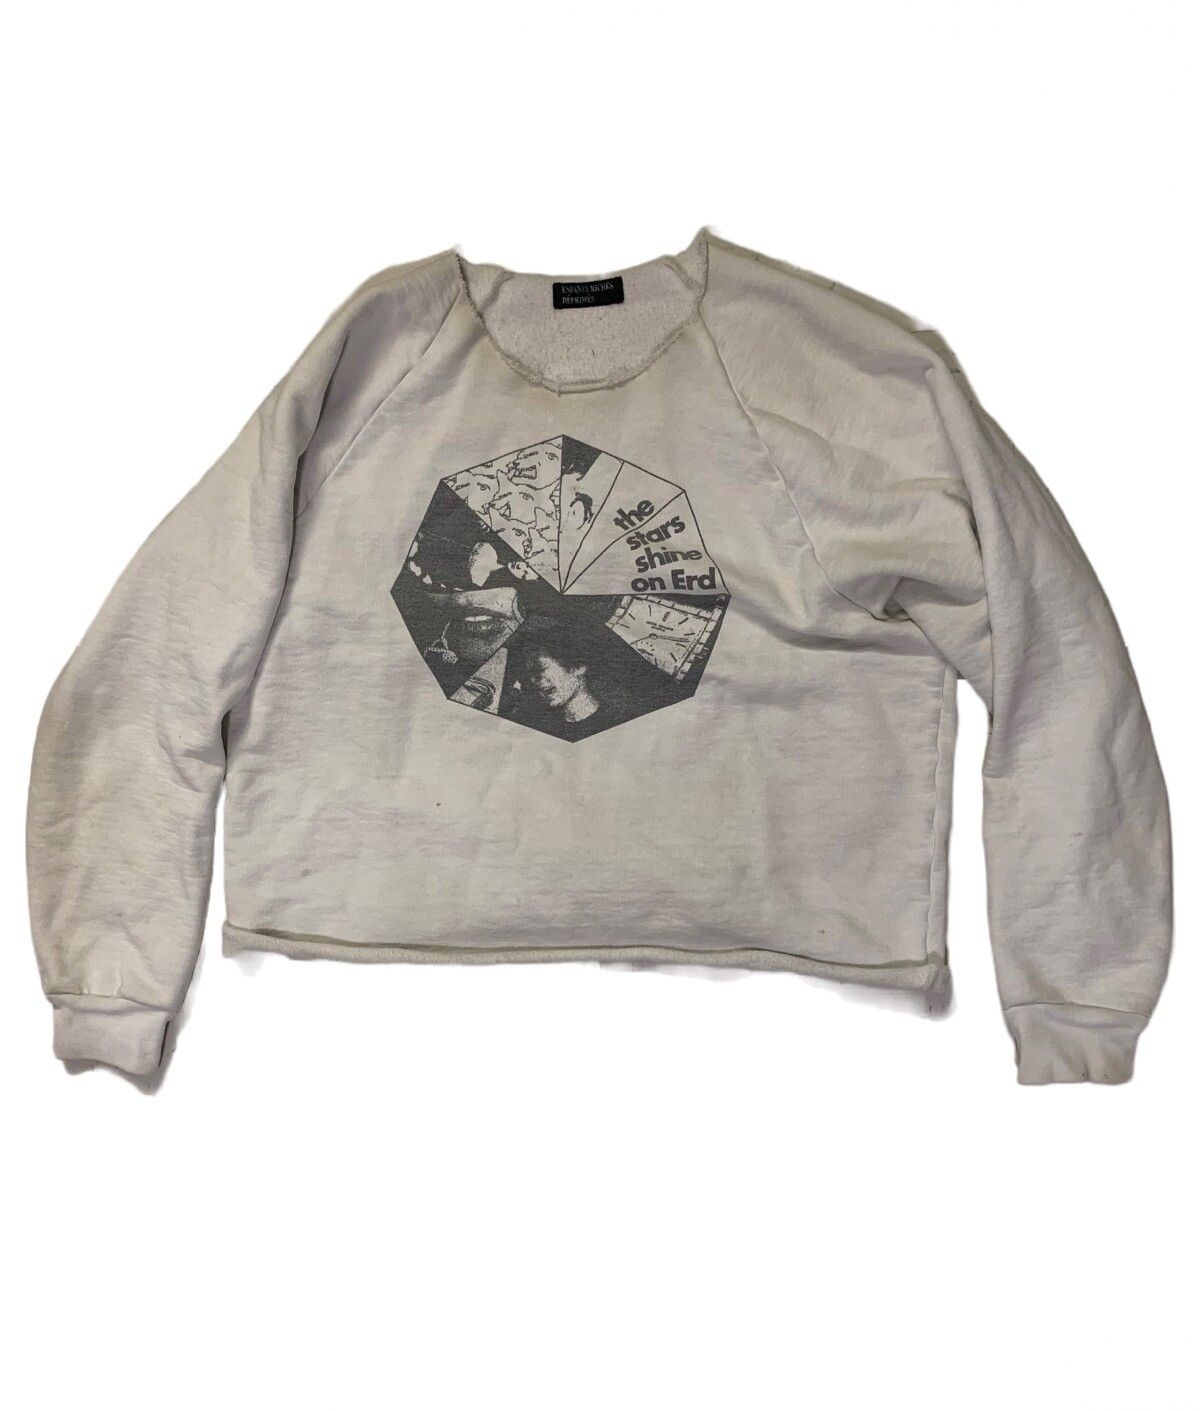 Enfants Riches Deprimes The stars shine on ERD cropped sweater | Grailed